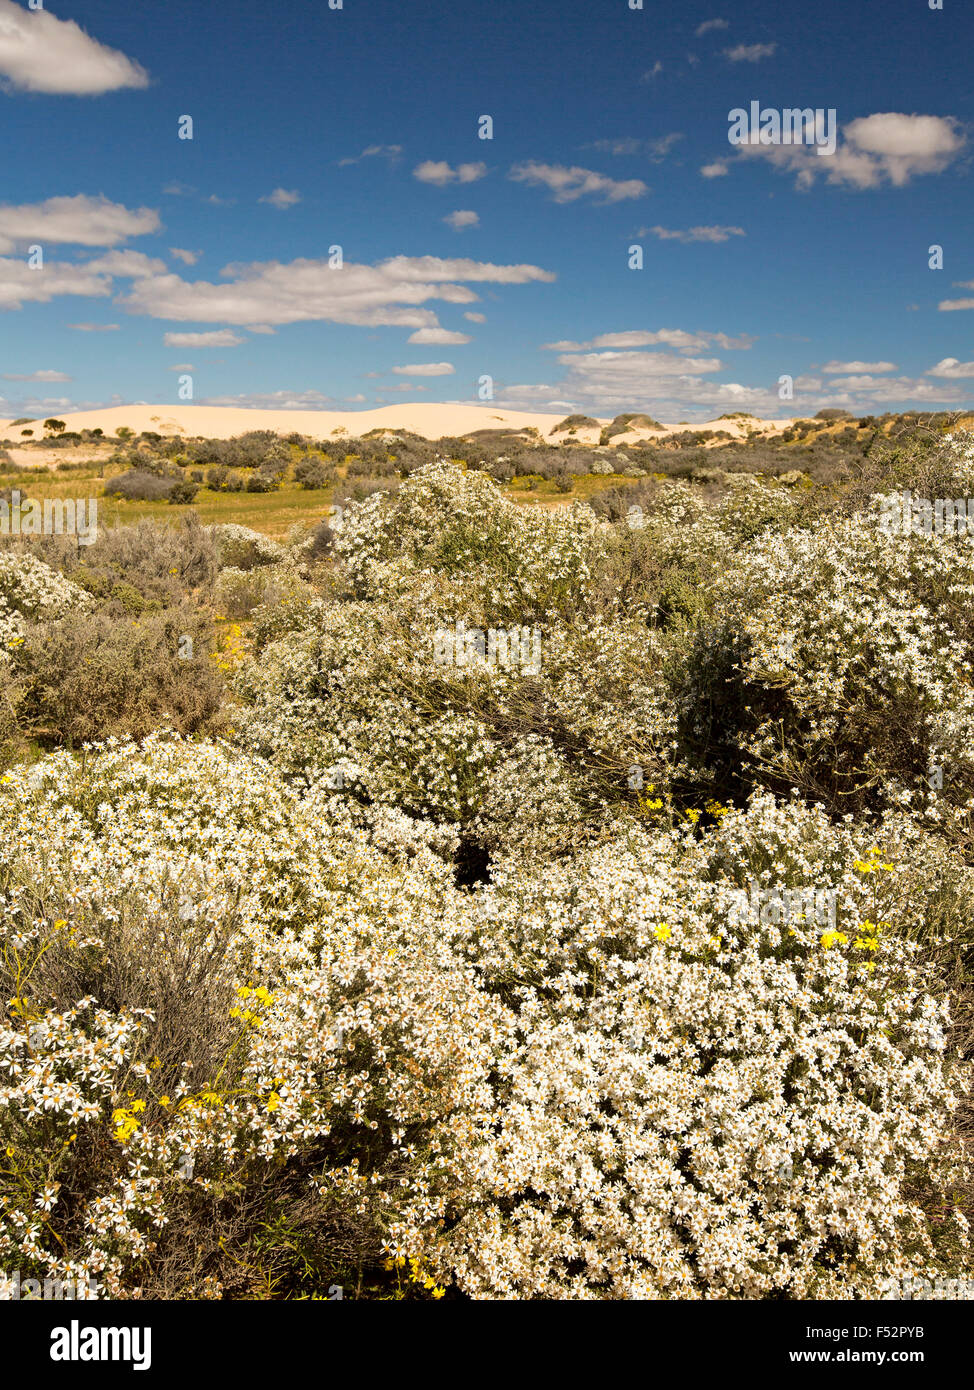 Australian outback landscape cloaked with mass of white wildflowers, Olearia pimeleoides, mallee daisy bush, under blue sky Stock Photo